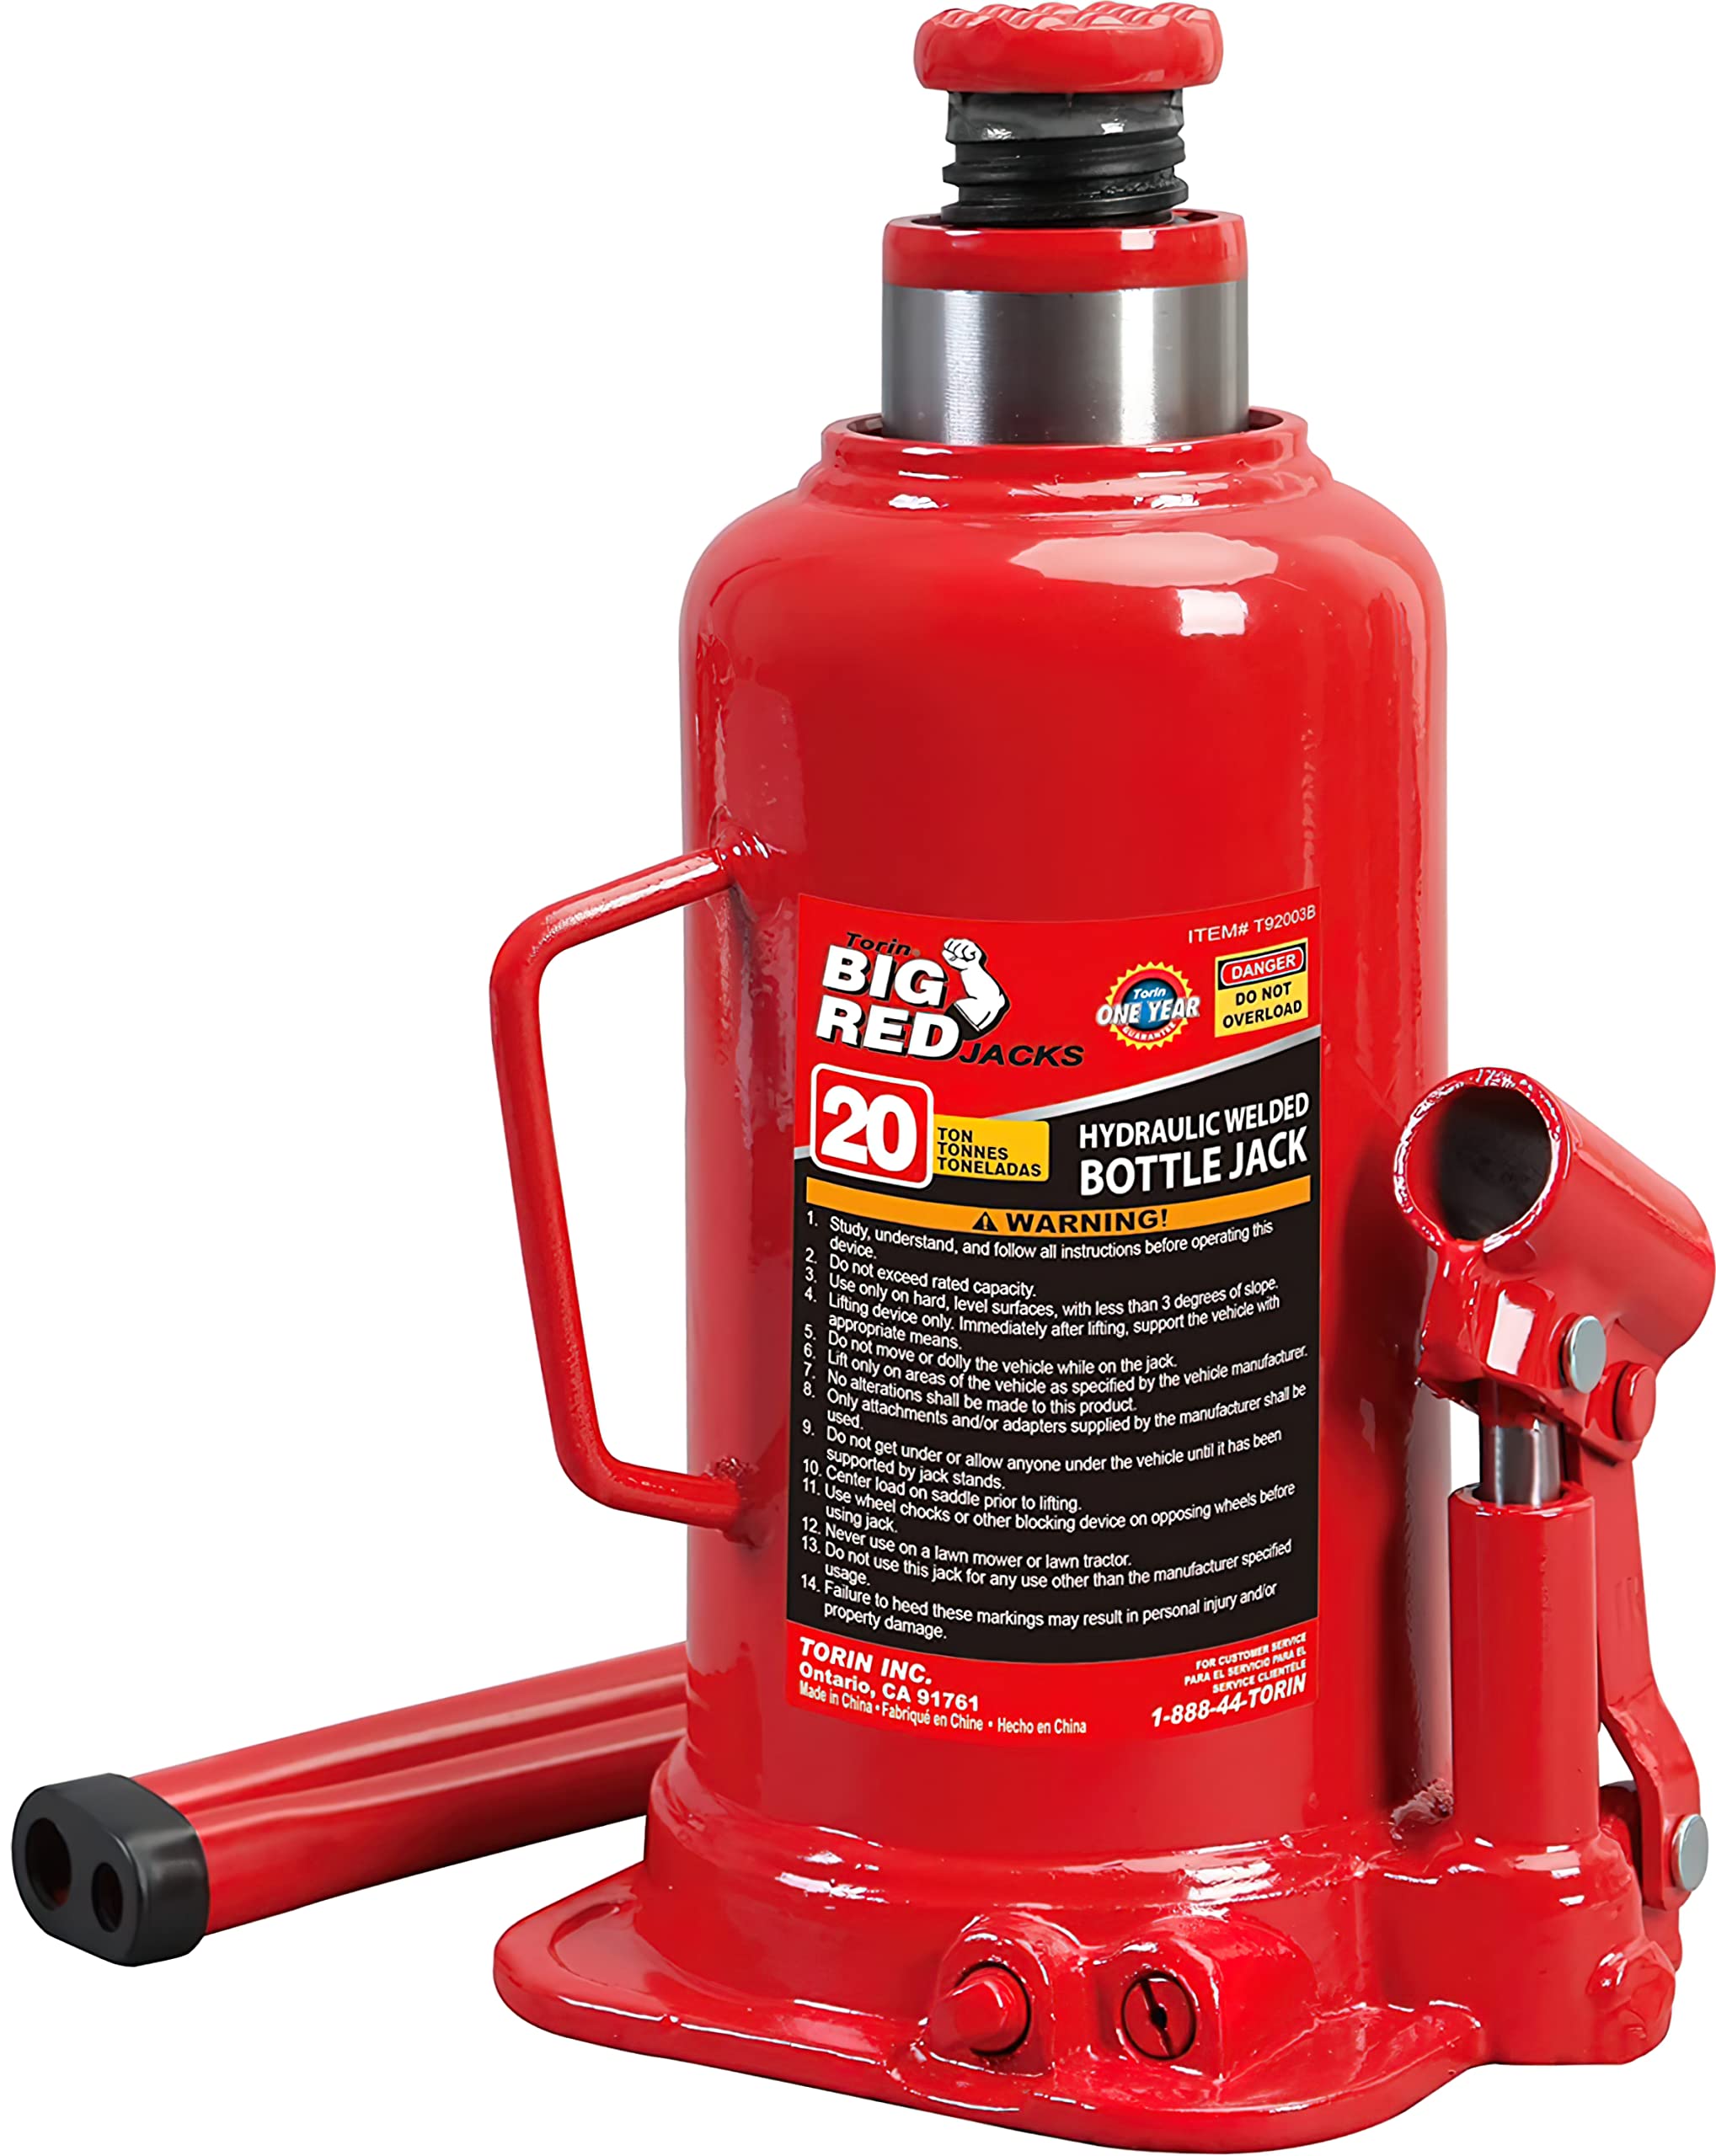 BIG RED 20 Ton (40,000lbs) Hydraulic Welded Bottle Jack Set (Red) $39.53 + Free Shipping